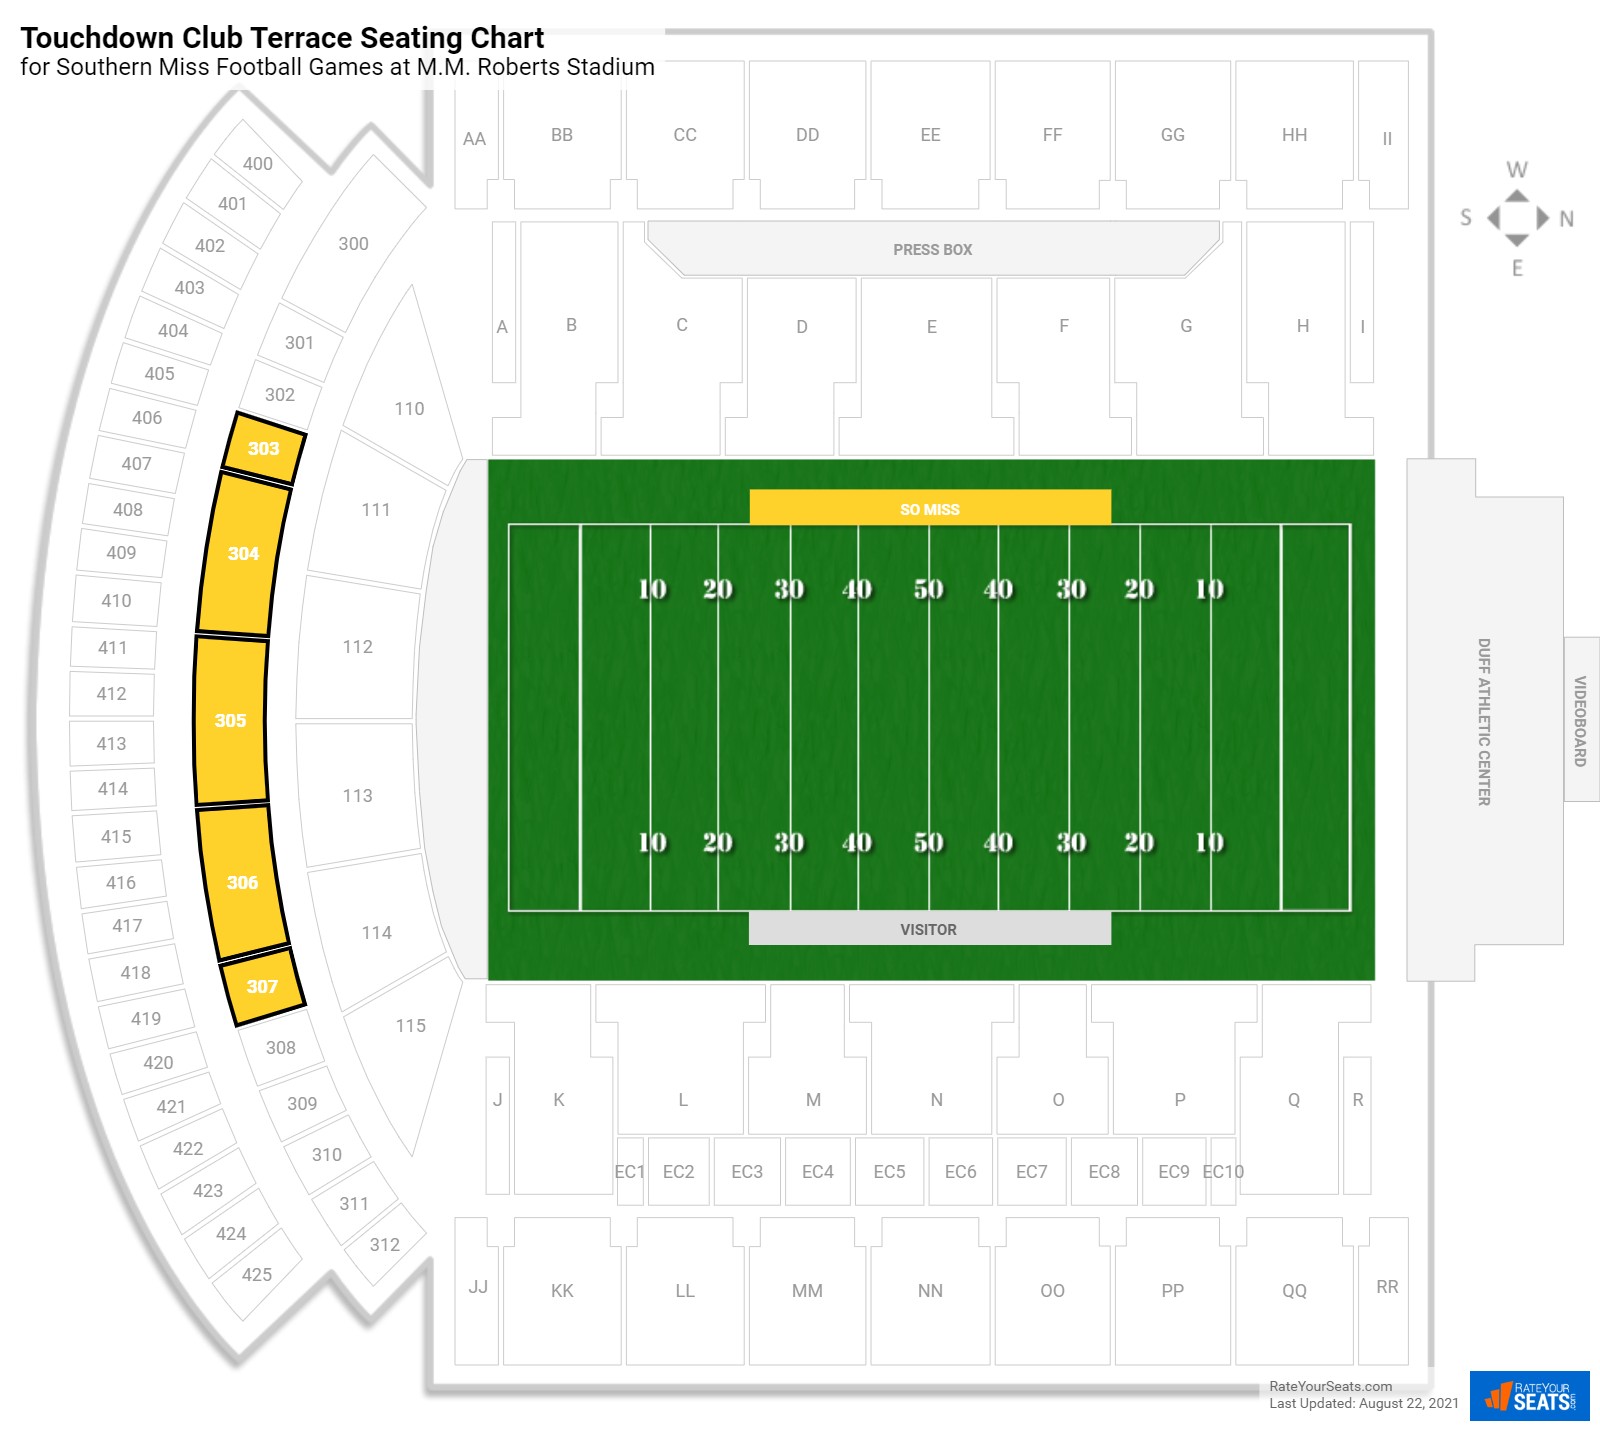 Southern Miss Touchdown Club Terrace Seating Chart at M.M. Roberts Stadium